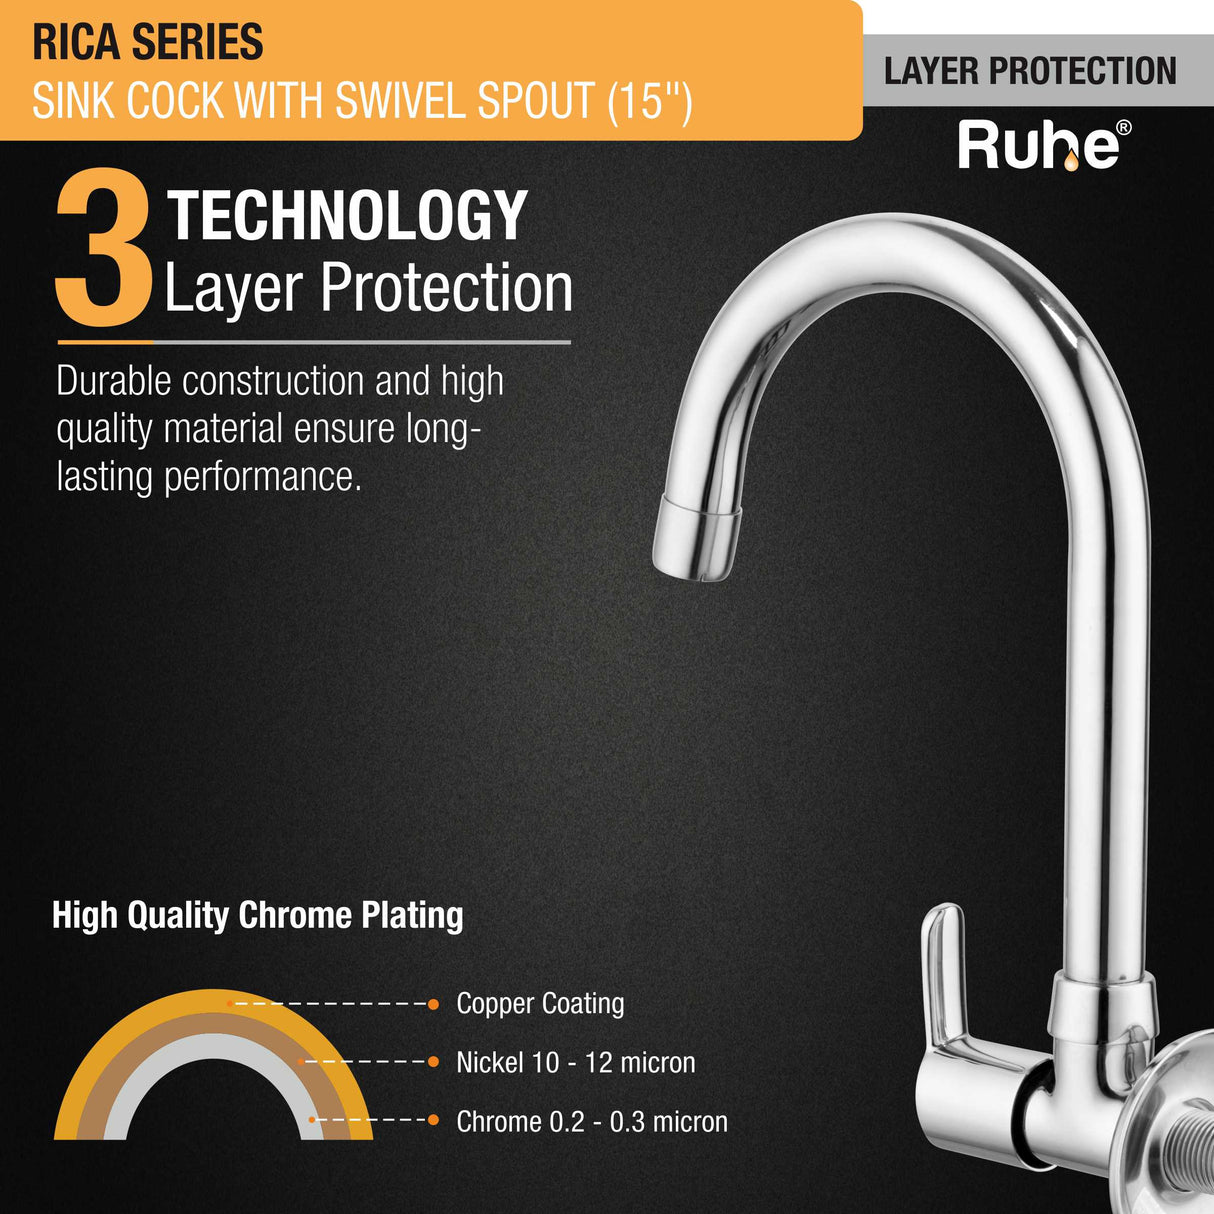 Rica Sink Tap with Medium (15 inches) Round Swivel Spout Brass Faucet 3 layer protection